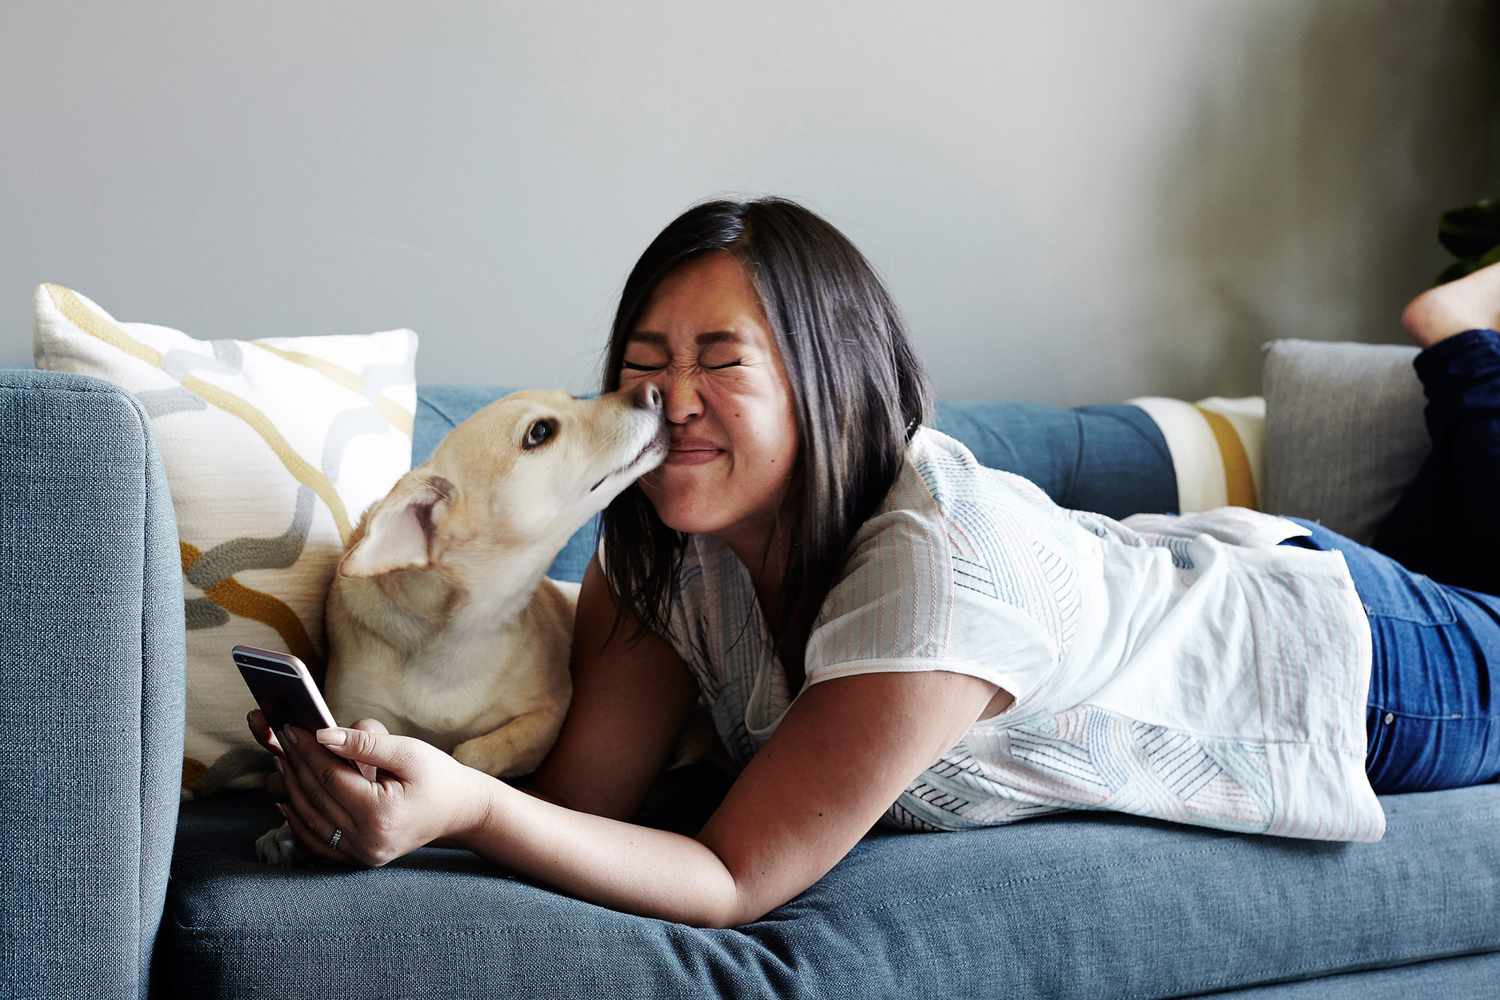 Woman lying on sofa using smartphone, pet dog licking her face